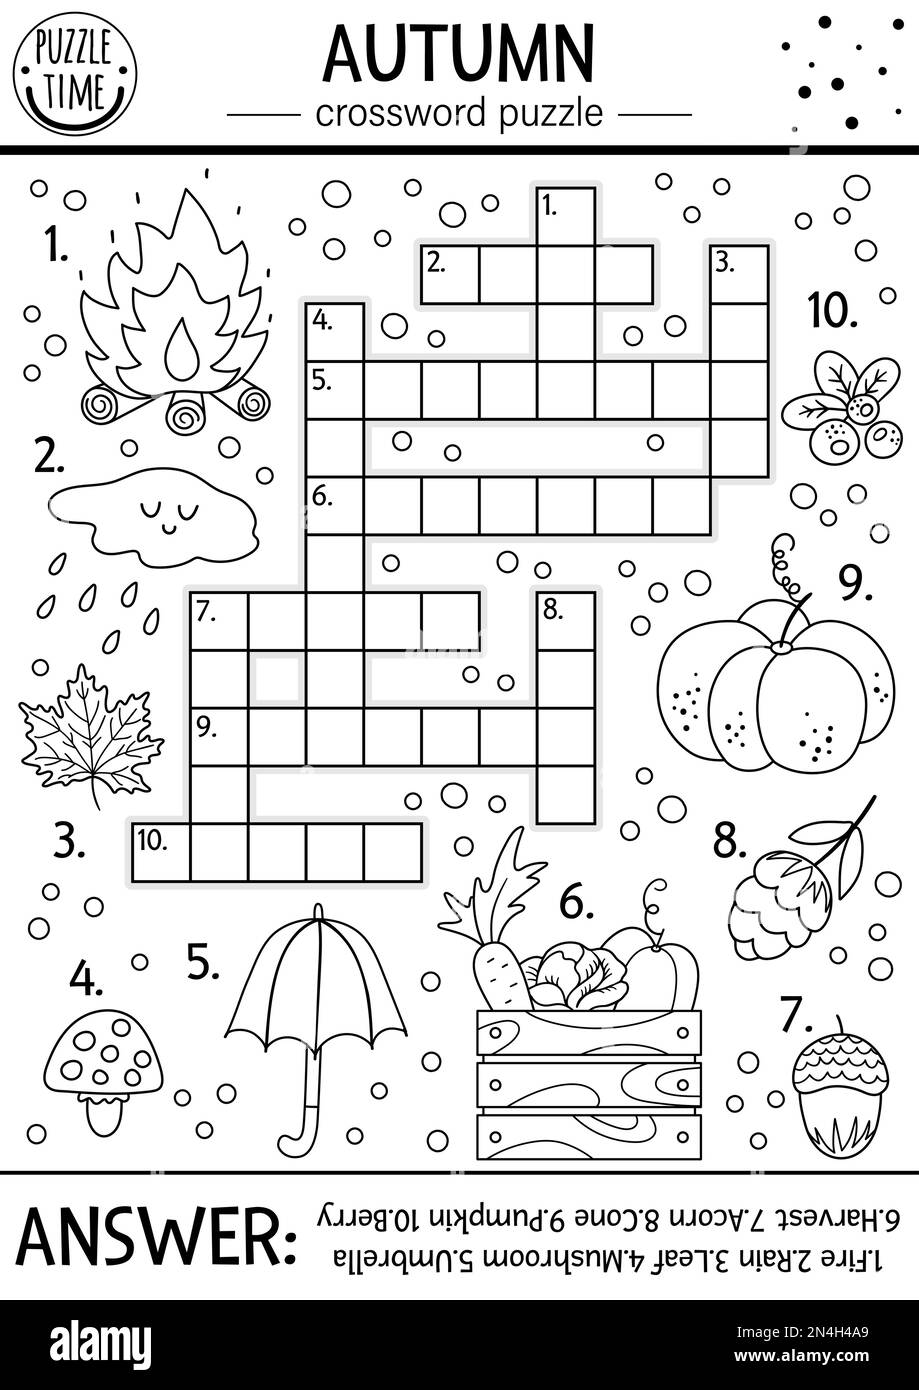 Vector black and white fall season crossword puzzle for kids. Simple outline quiz with autumn forest objects for children. Educational activity or col Stock Vector